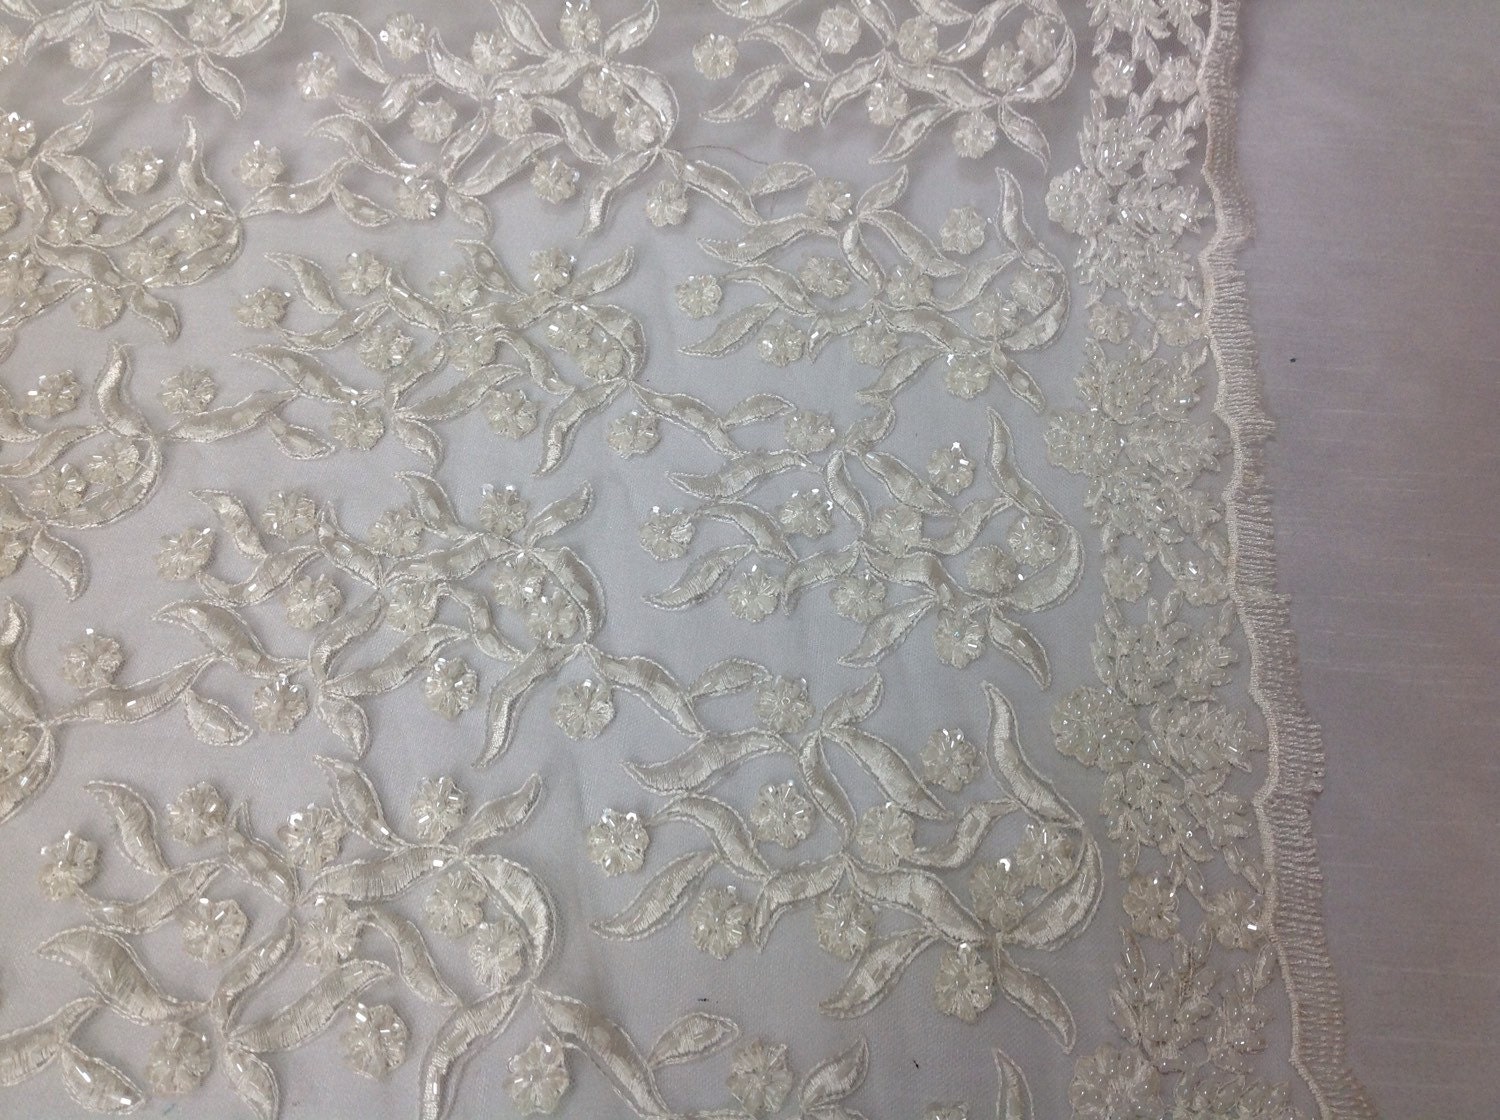 Bridal wedding beaded ivory mesh fabric lace. Sold by the